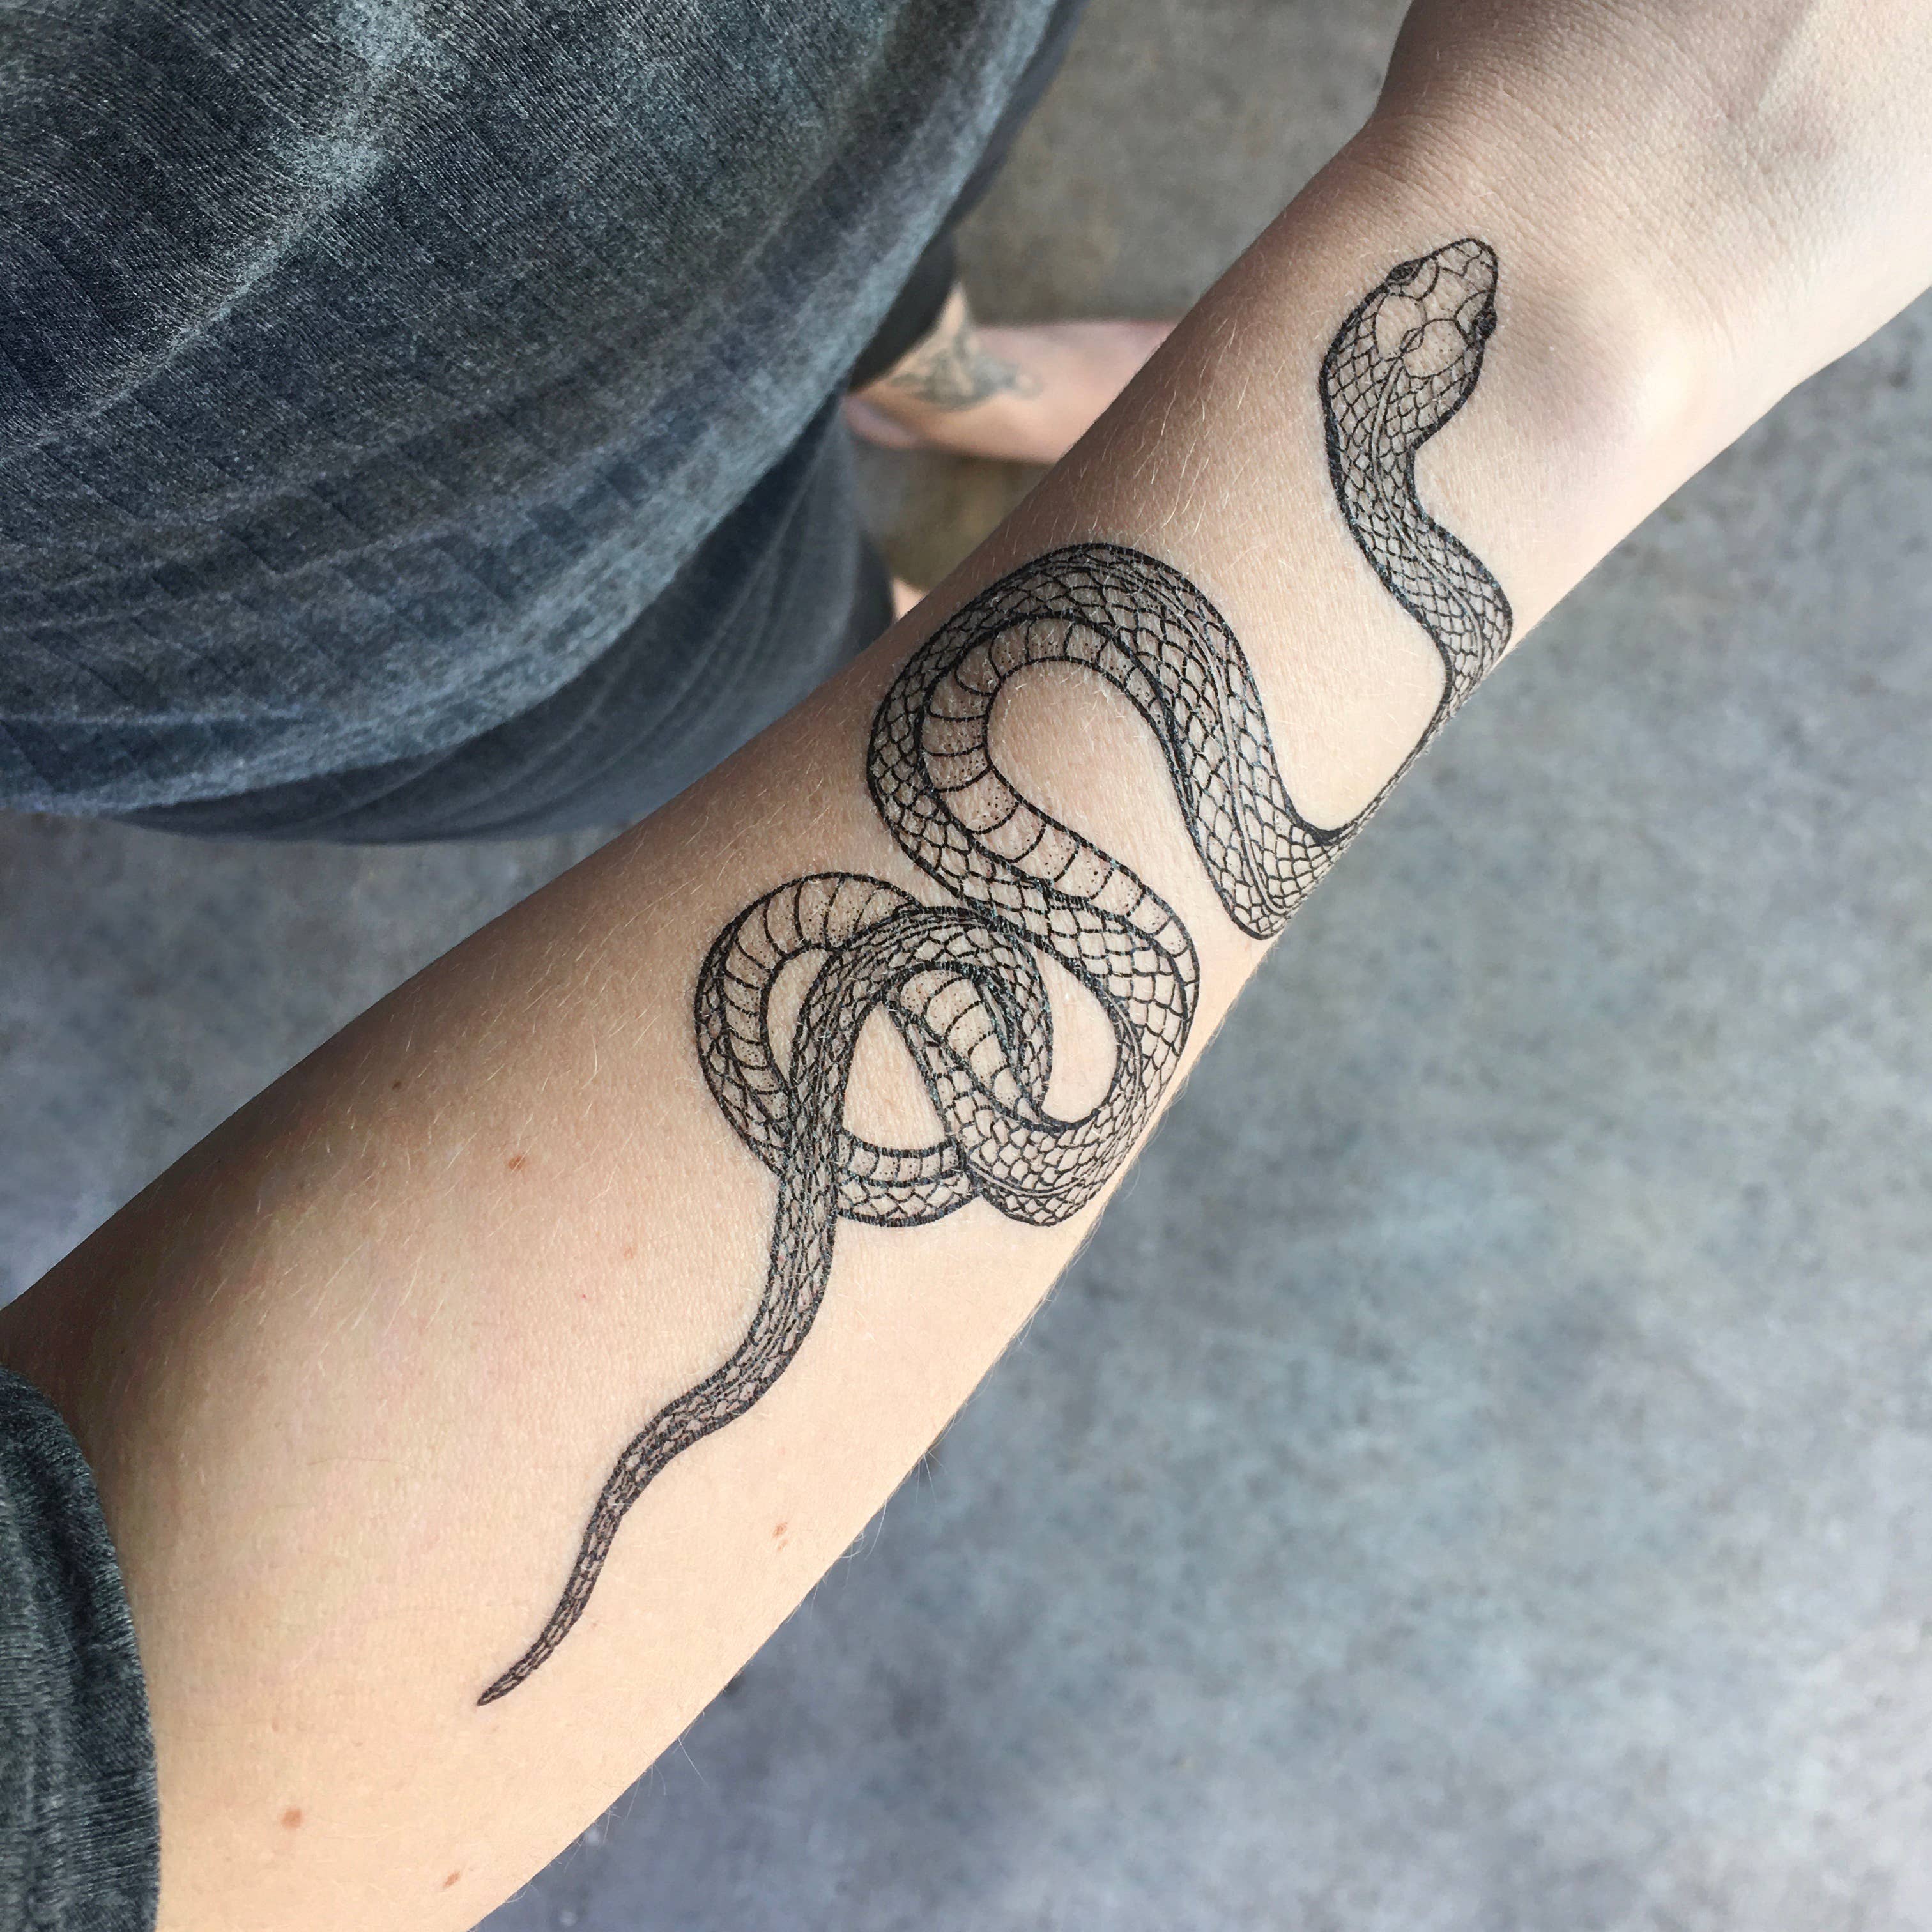 Small snake and rose tattoo - Tattoogrid.net